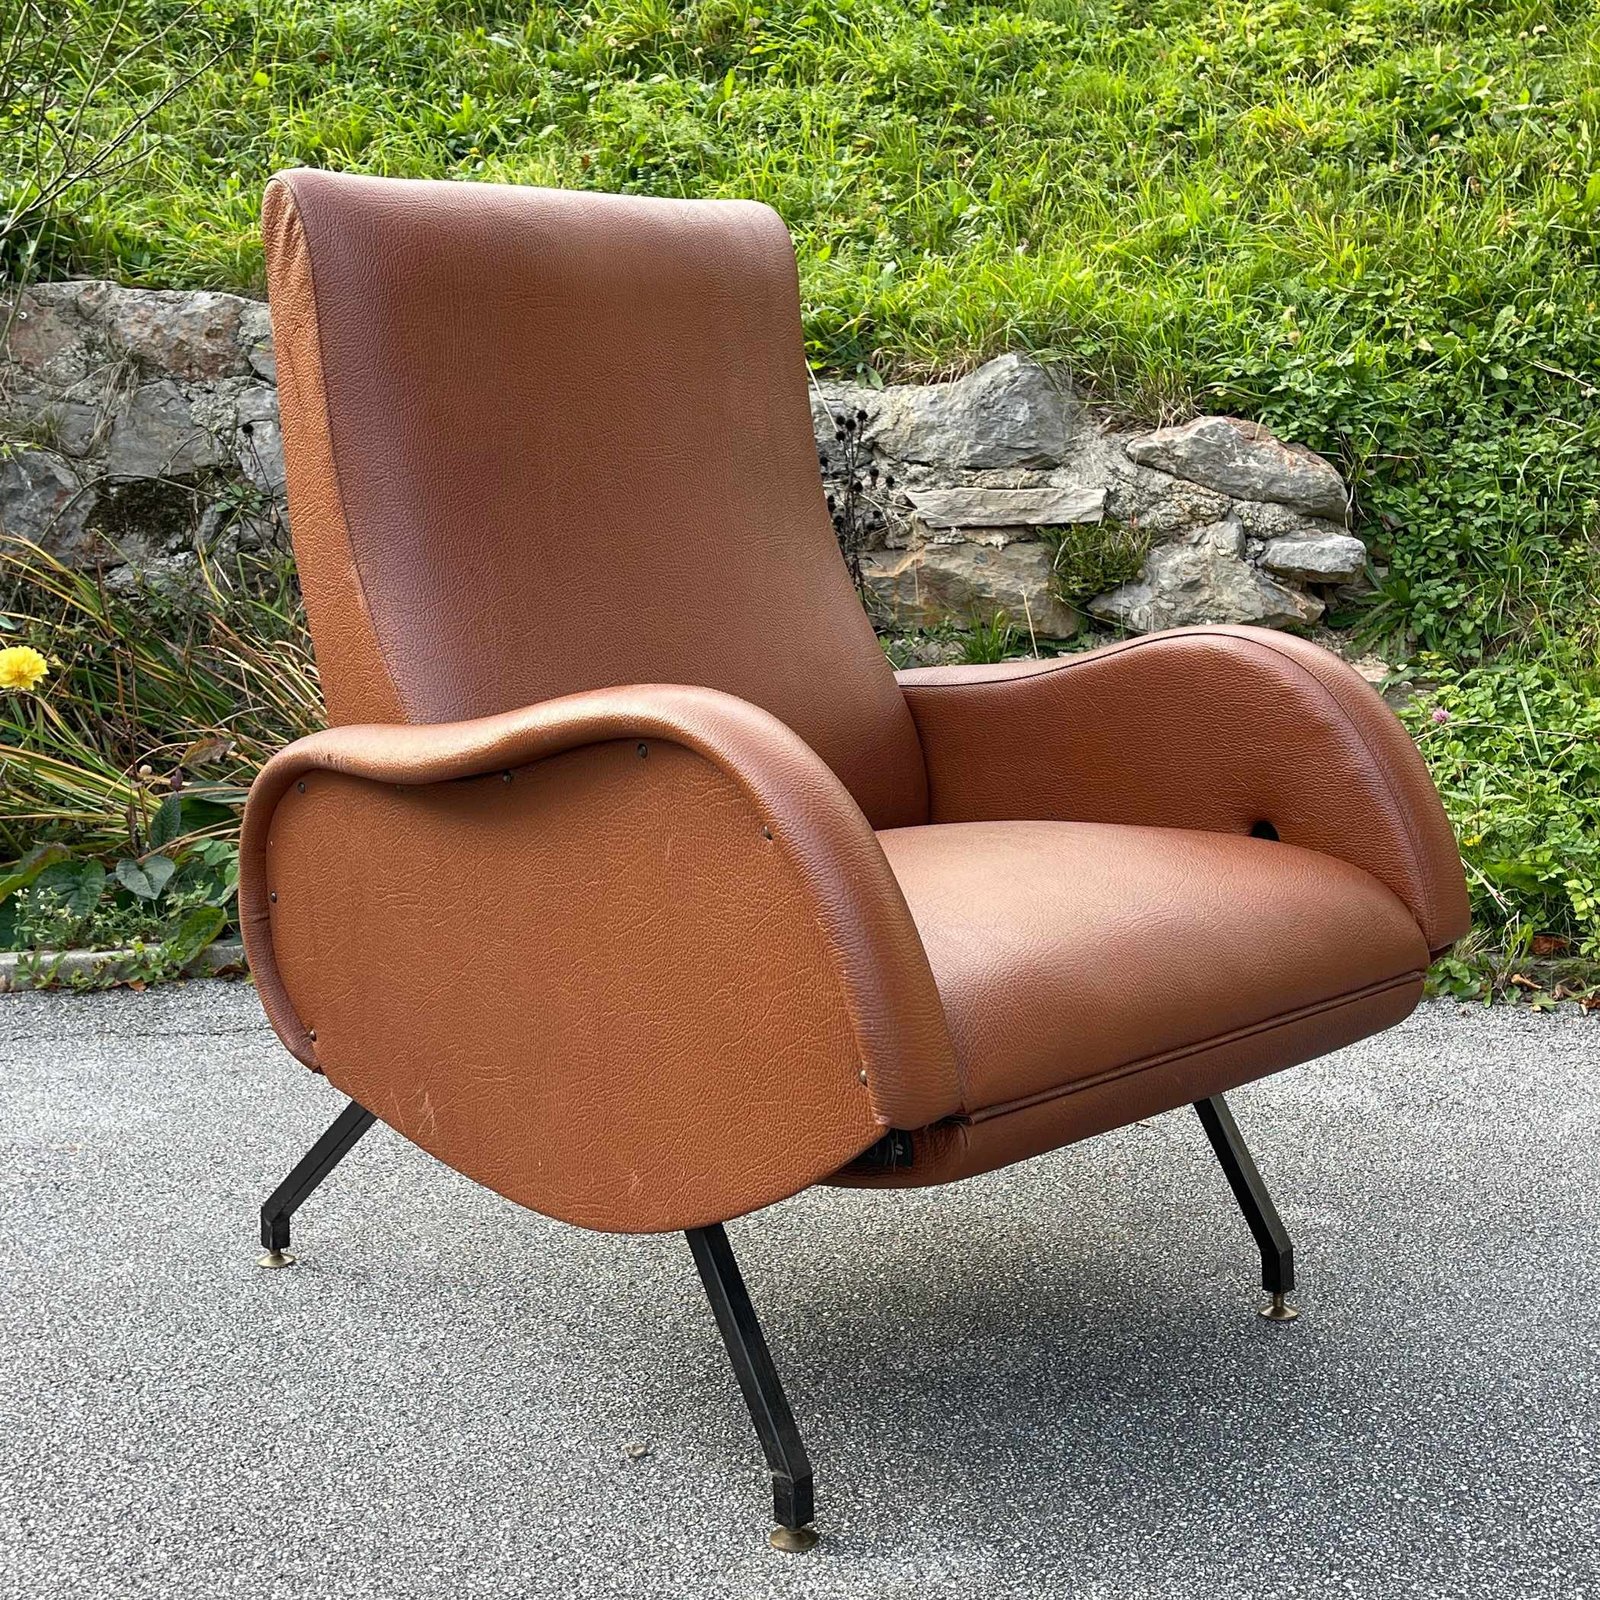 Mid-century modern brown armchair with footrest by Marco Zanuso Italy 1960s Vintage italian modern lounge recliner chair